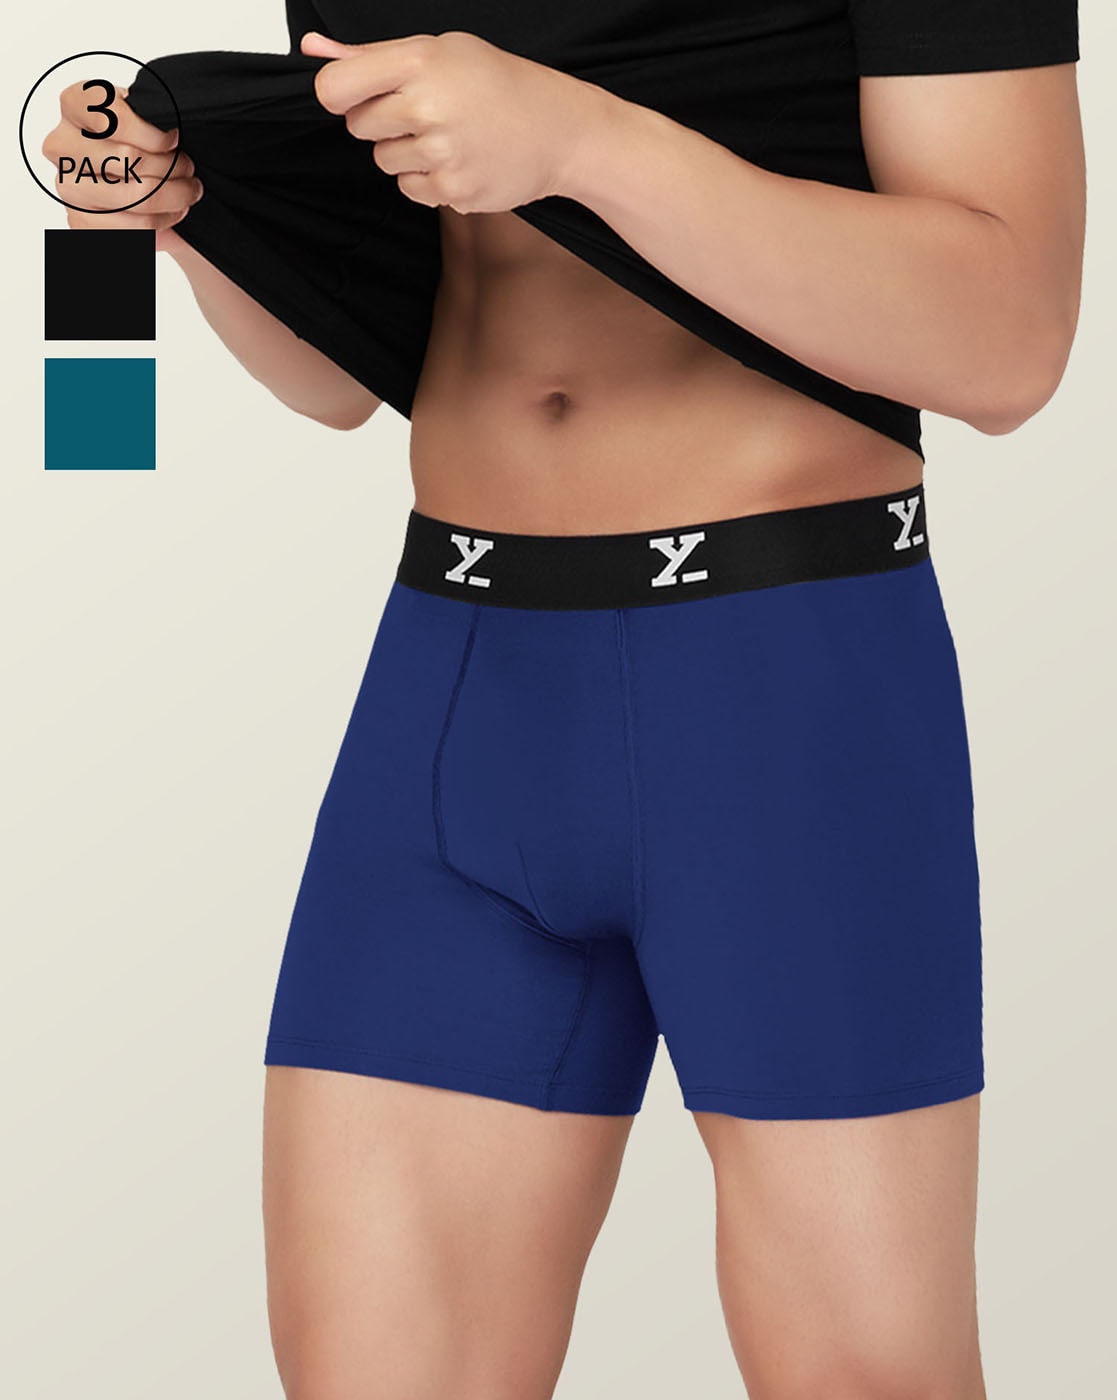 boxers or briefs? (@boxer_or_brief) / X